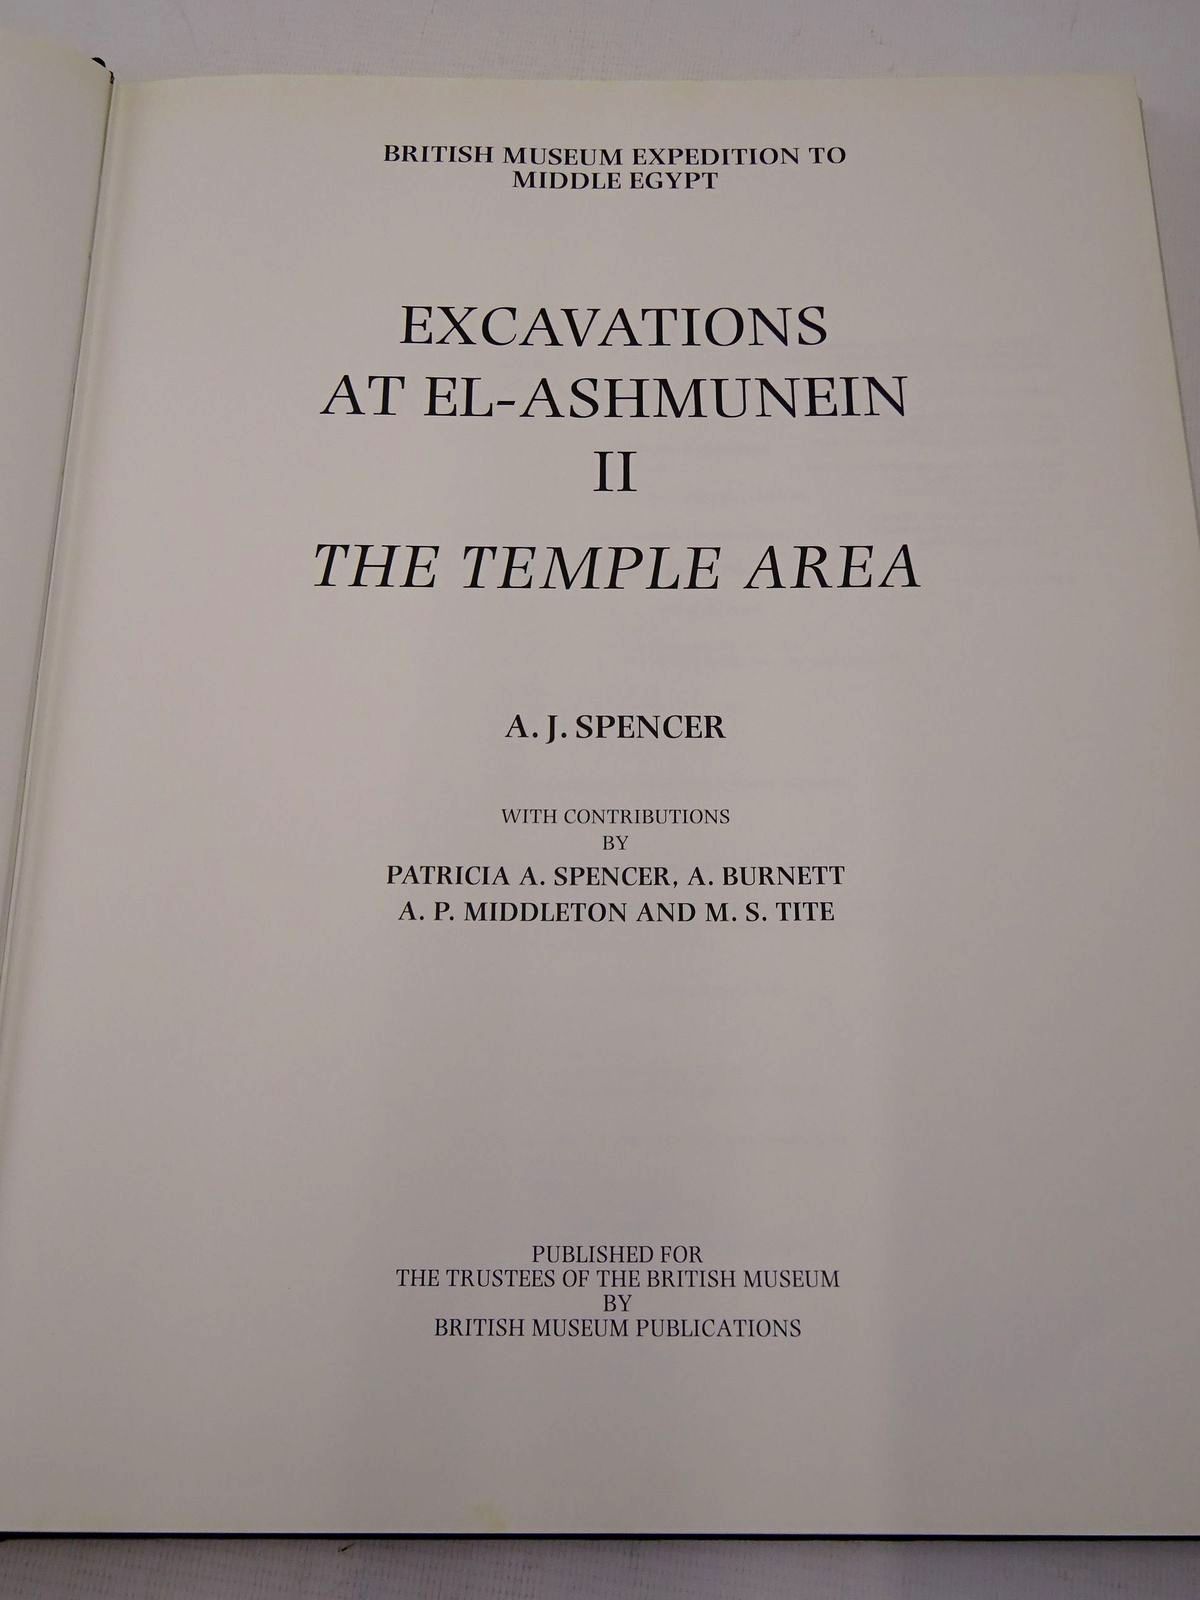 Photo of EXCAVATIONS AT EL-ASHMUNEIN II THE TEMPLE AREA written by Spencer, A.J. published by British Museum Publications (STOCK CODE: 1817239)  for sale by Stella & Rose's Books